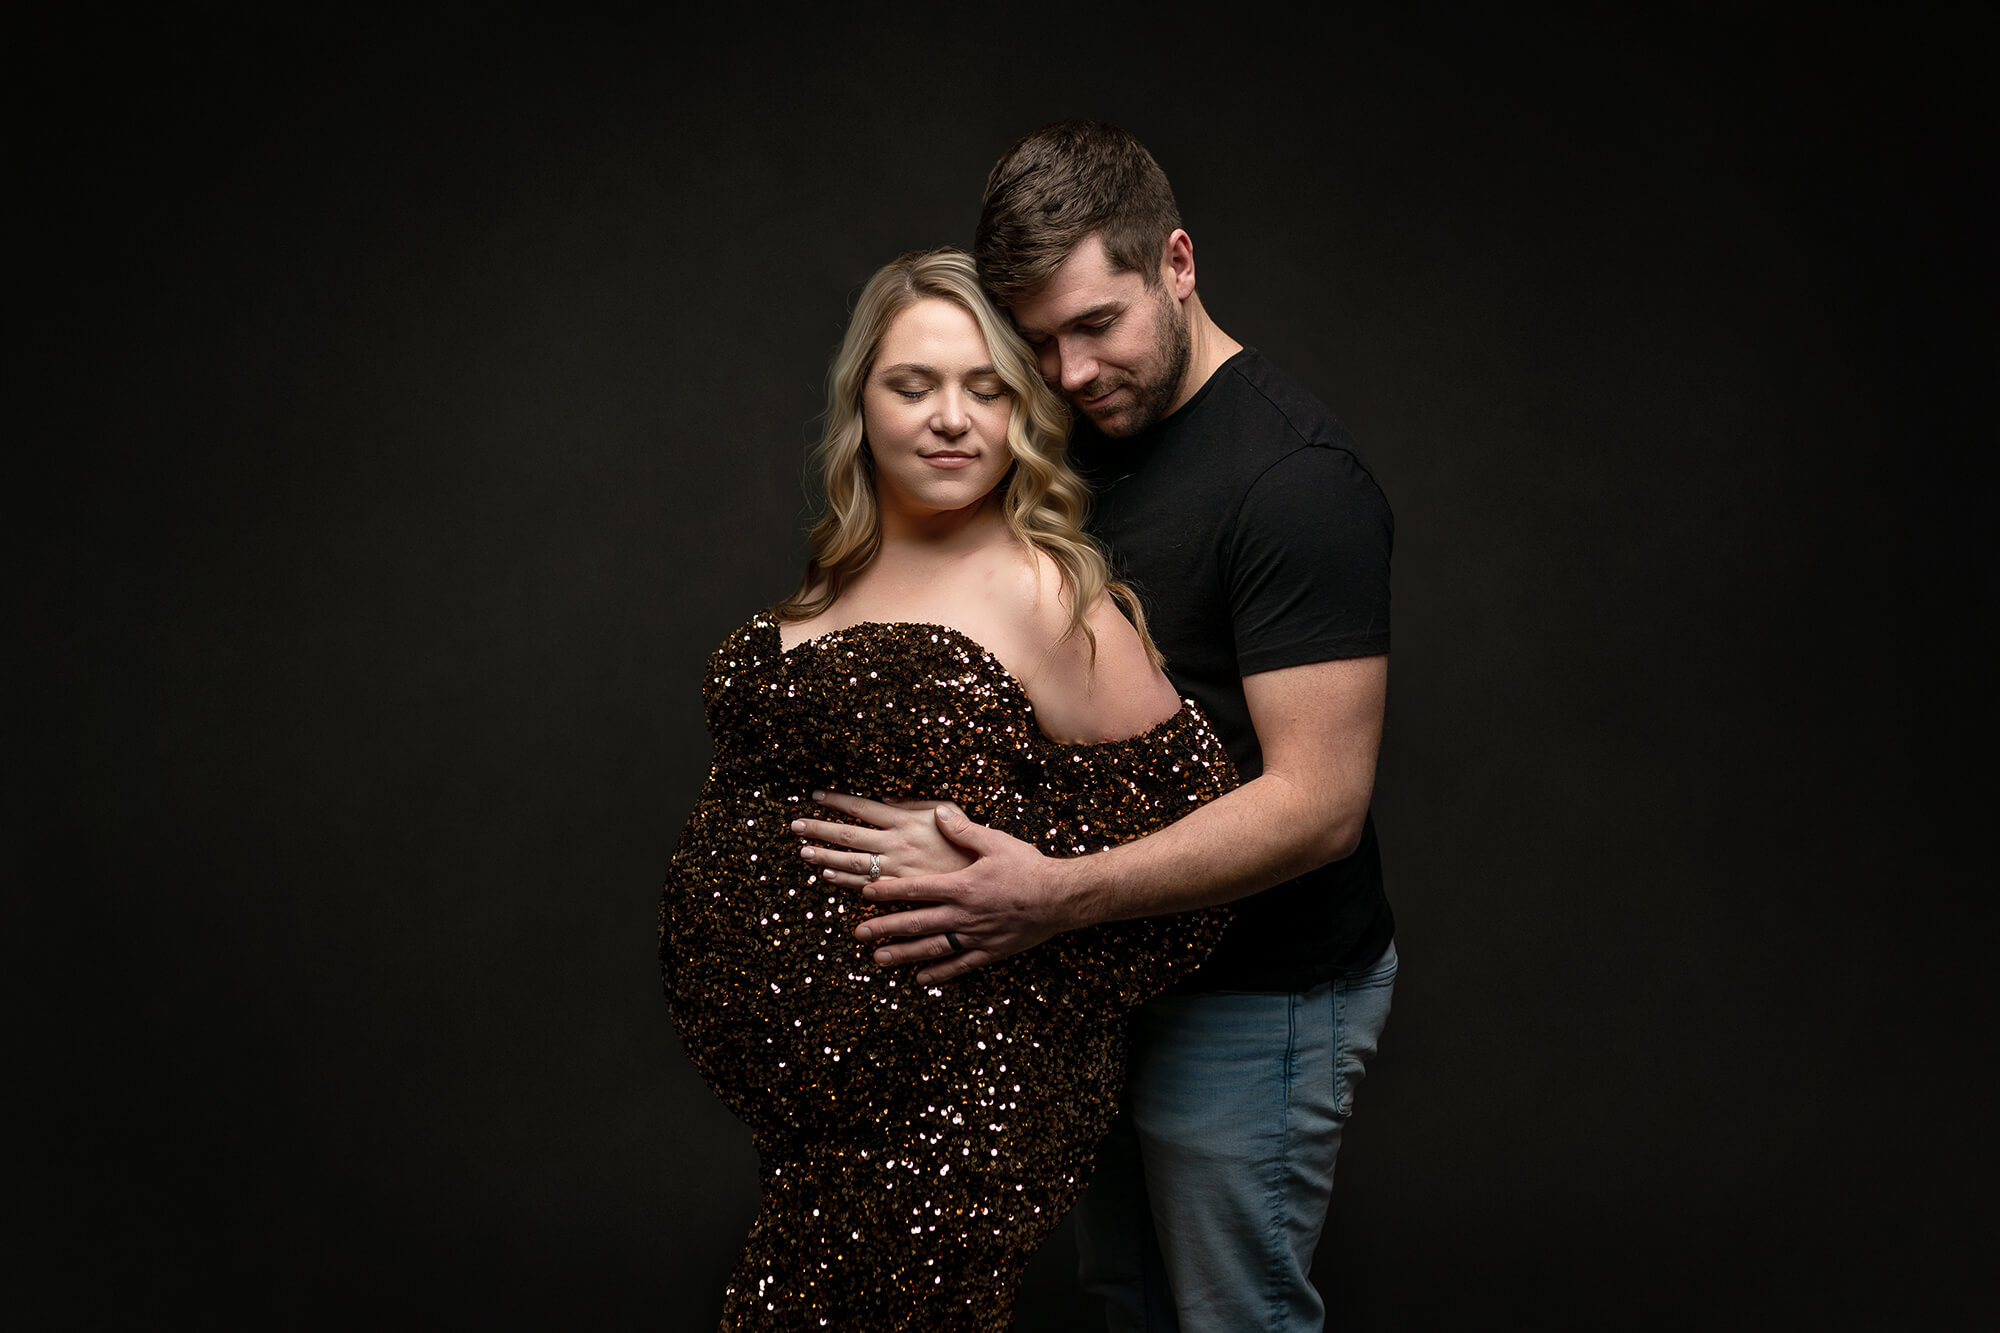 Studio maternity session in Southern Minnesota.